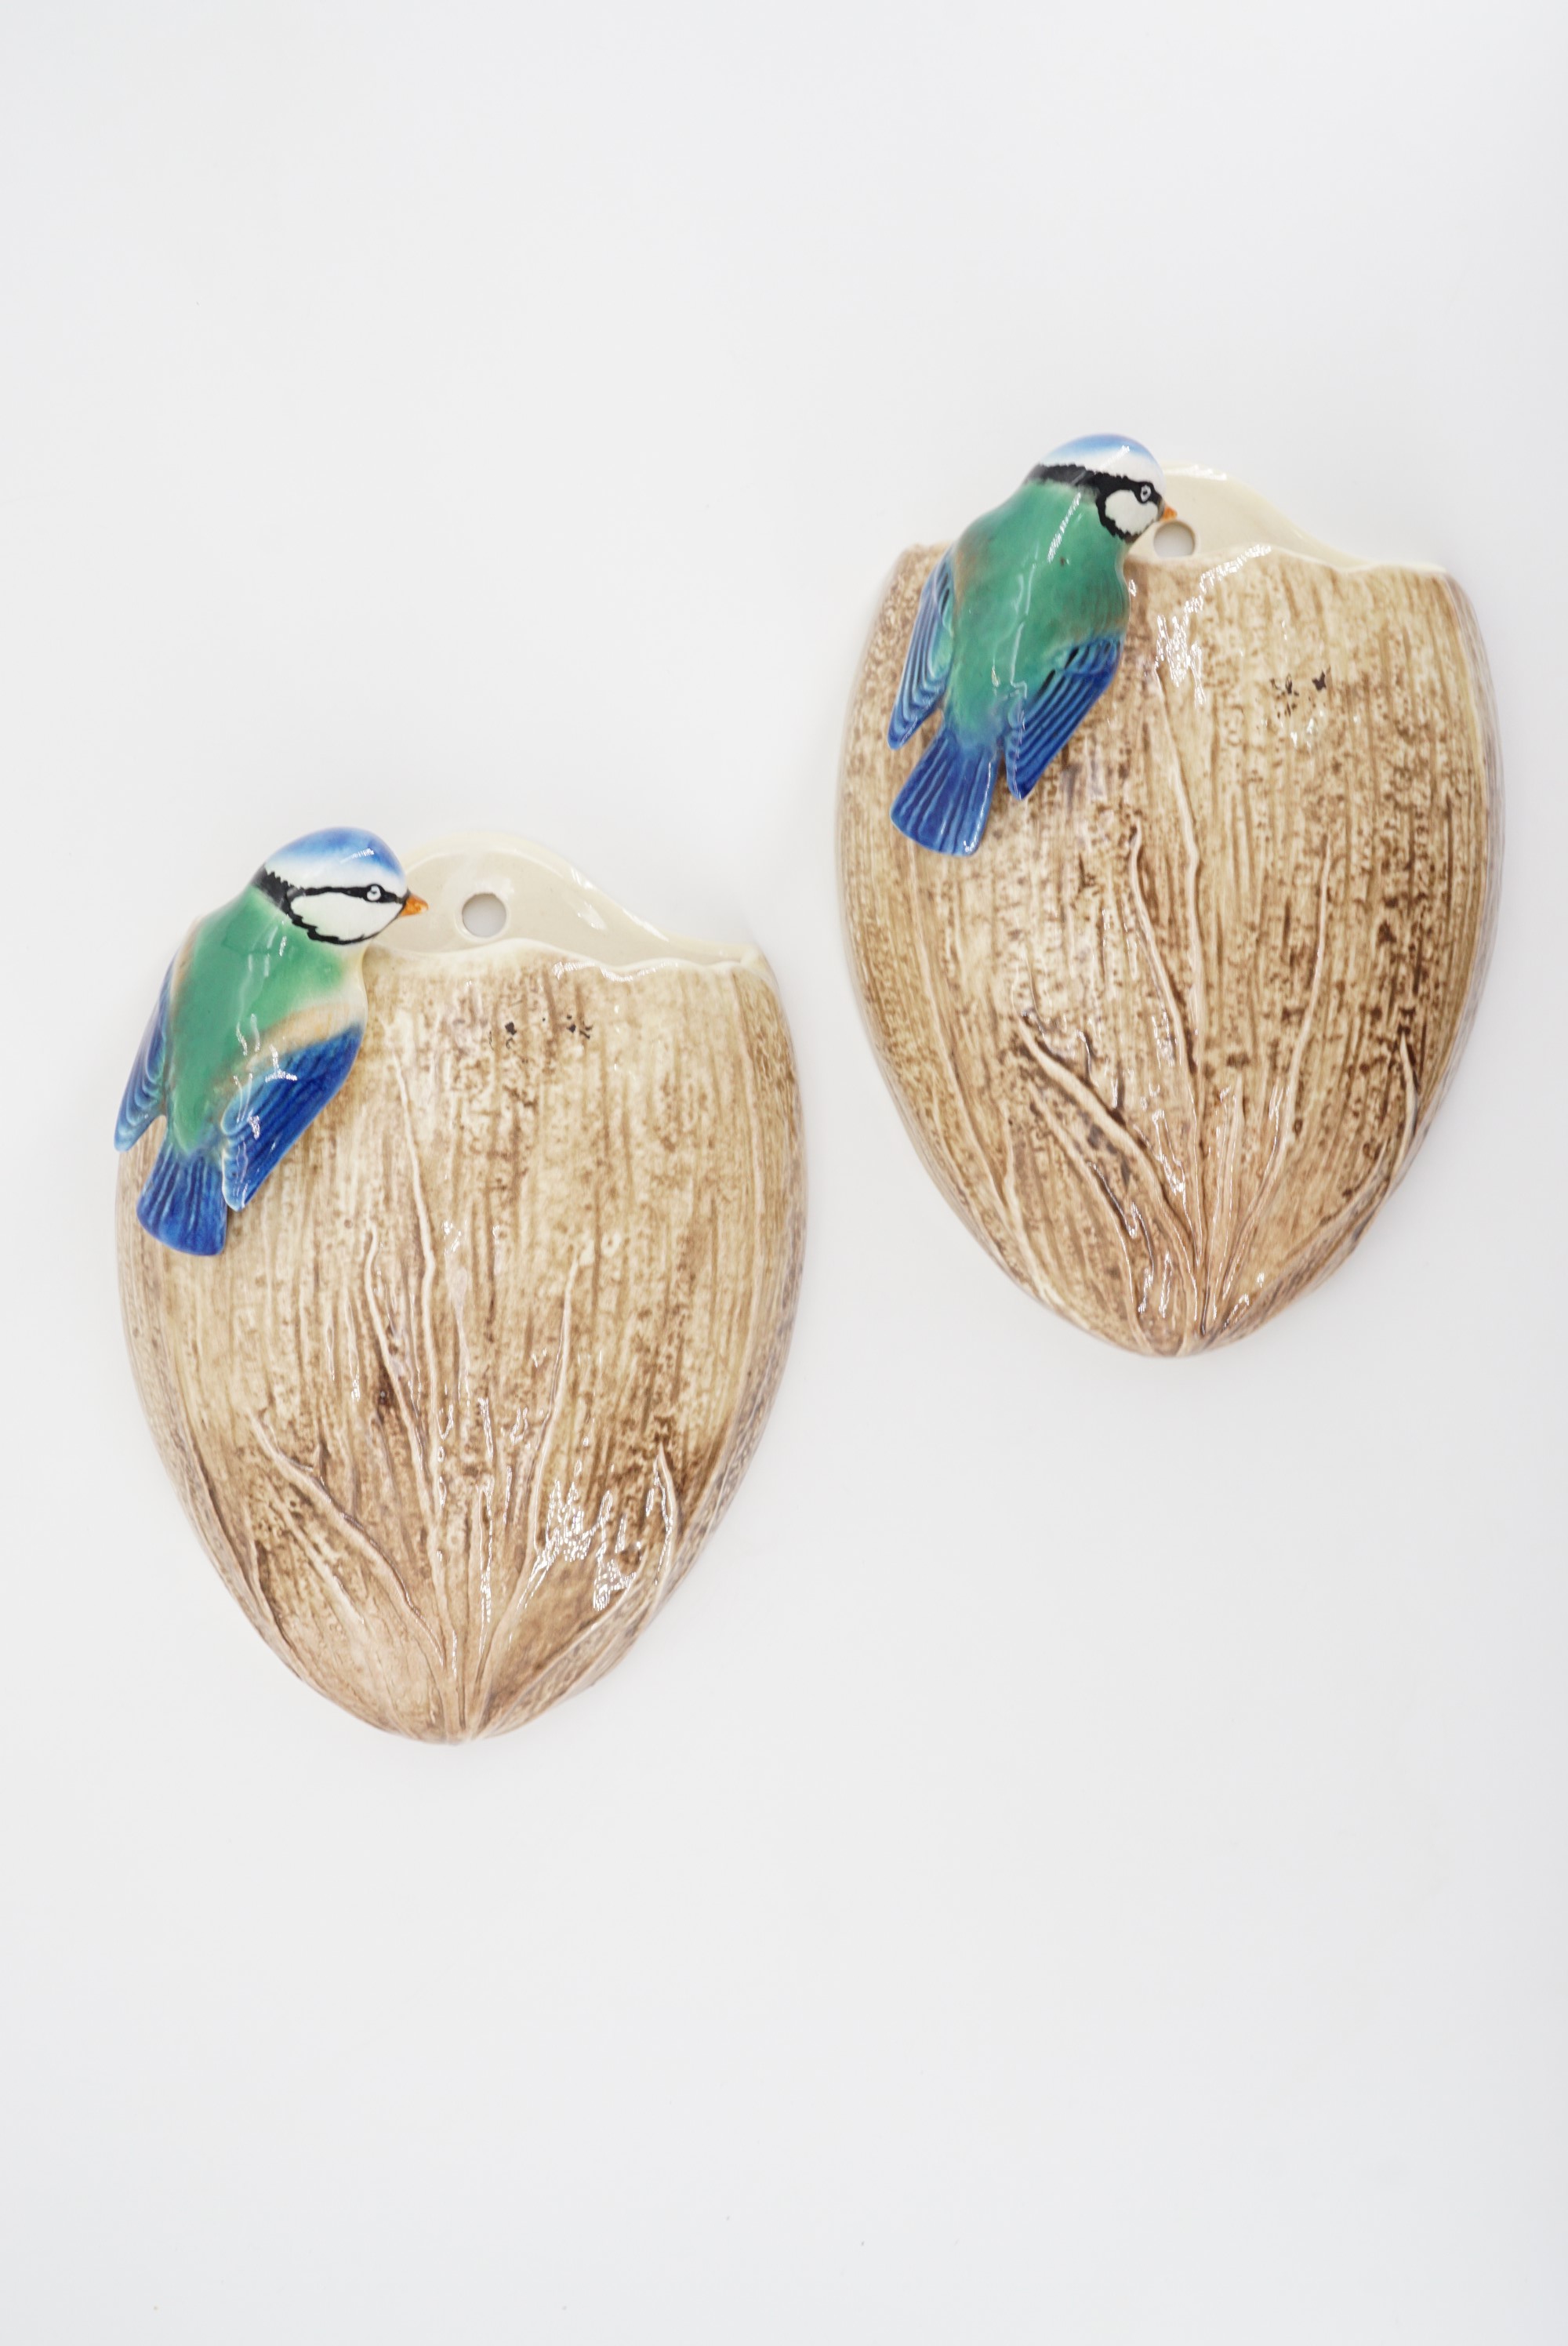 A pair of Sylvac wall pockets modelled as a blue tit perched on a coconut, pattern No 687, 20 cm - Image 2 of 3